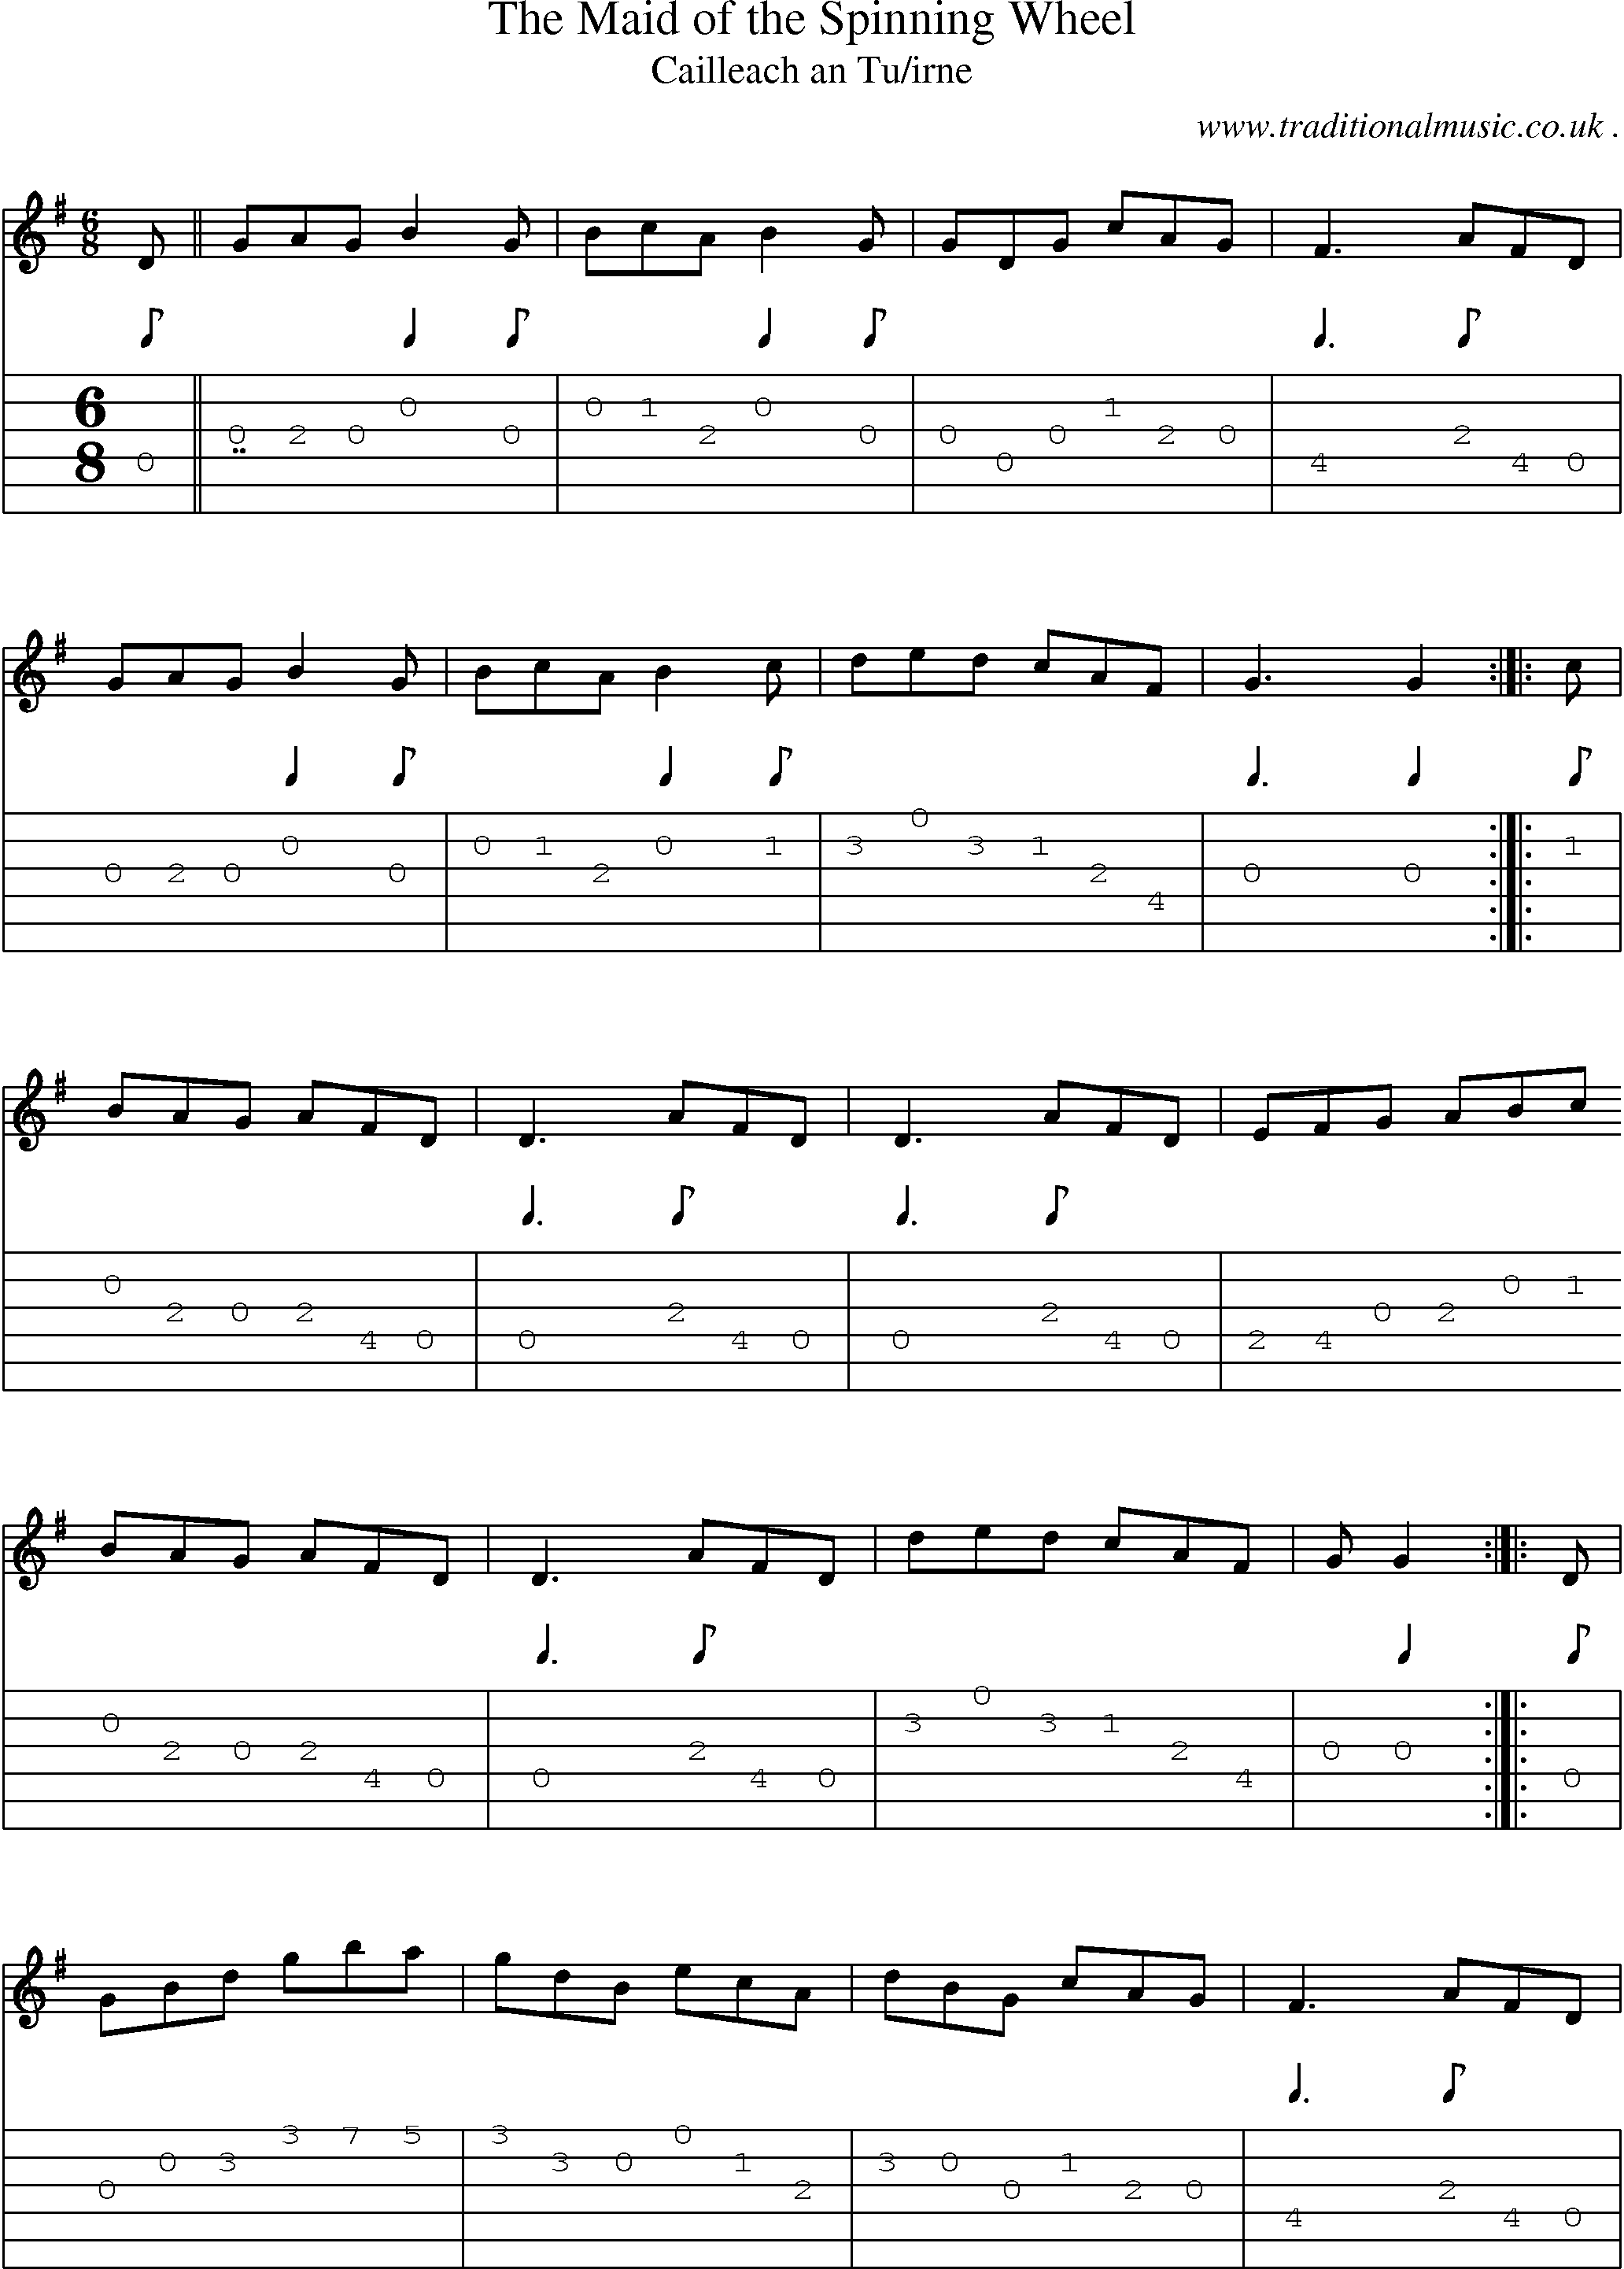 Sheet-Music and Guitar Tabs for The Maid Of The Spinning Wheel